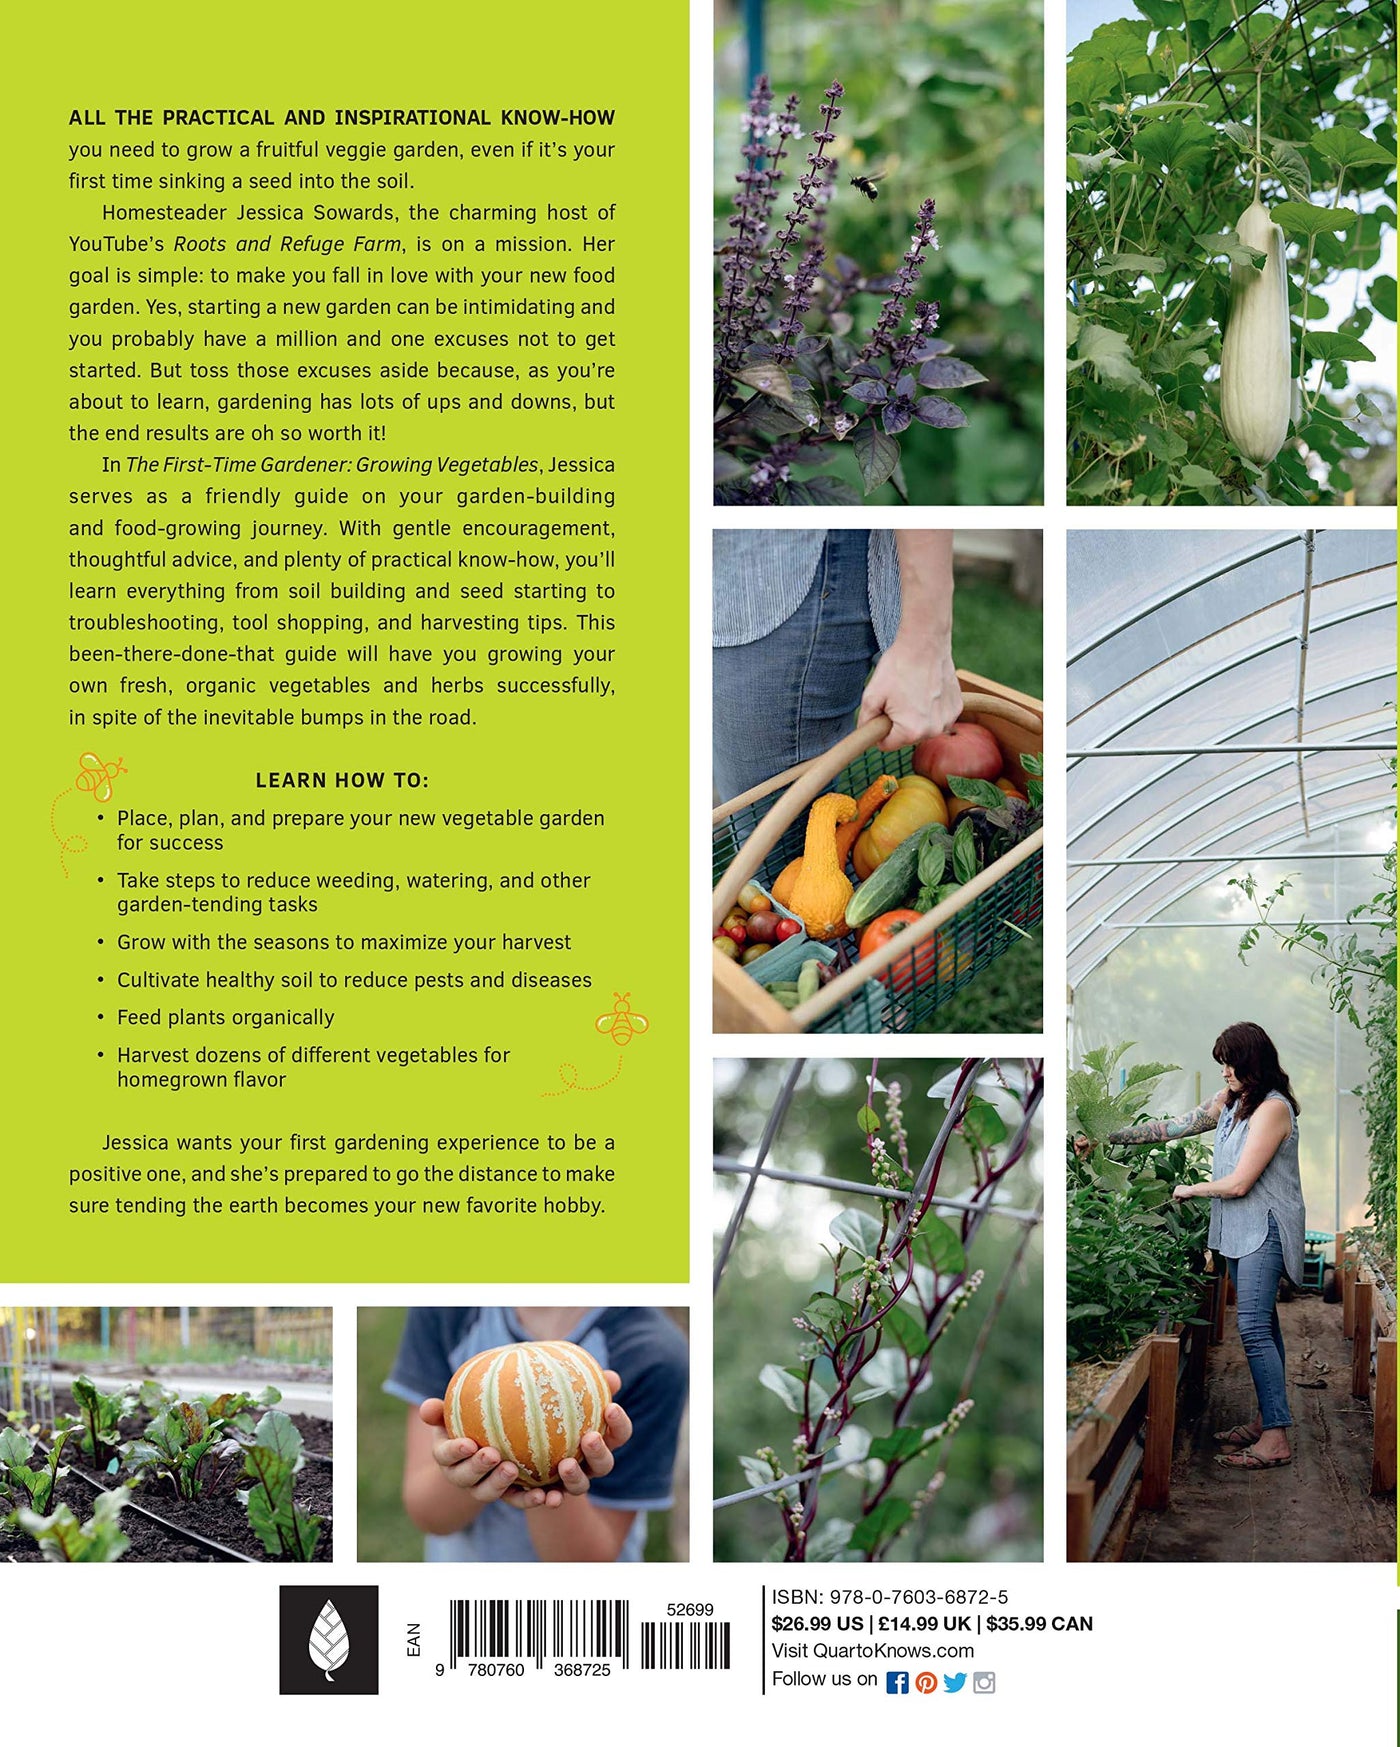 The First-time Gardener: All the know-how and encouragement you need to grow your brand new food garden (Spiral Bound)